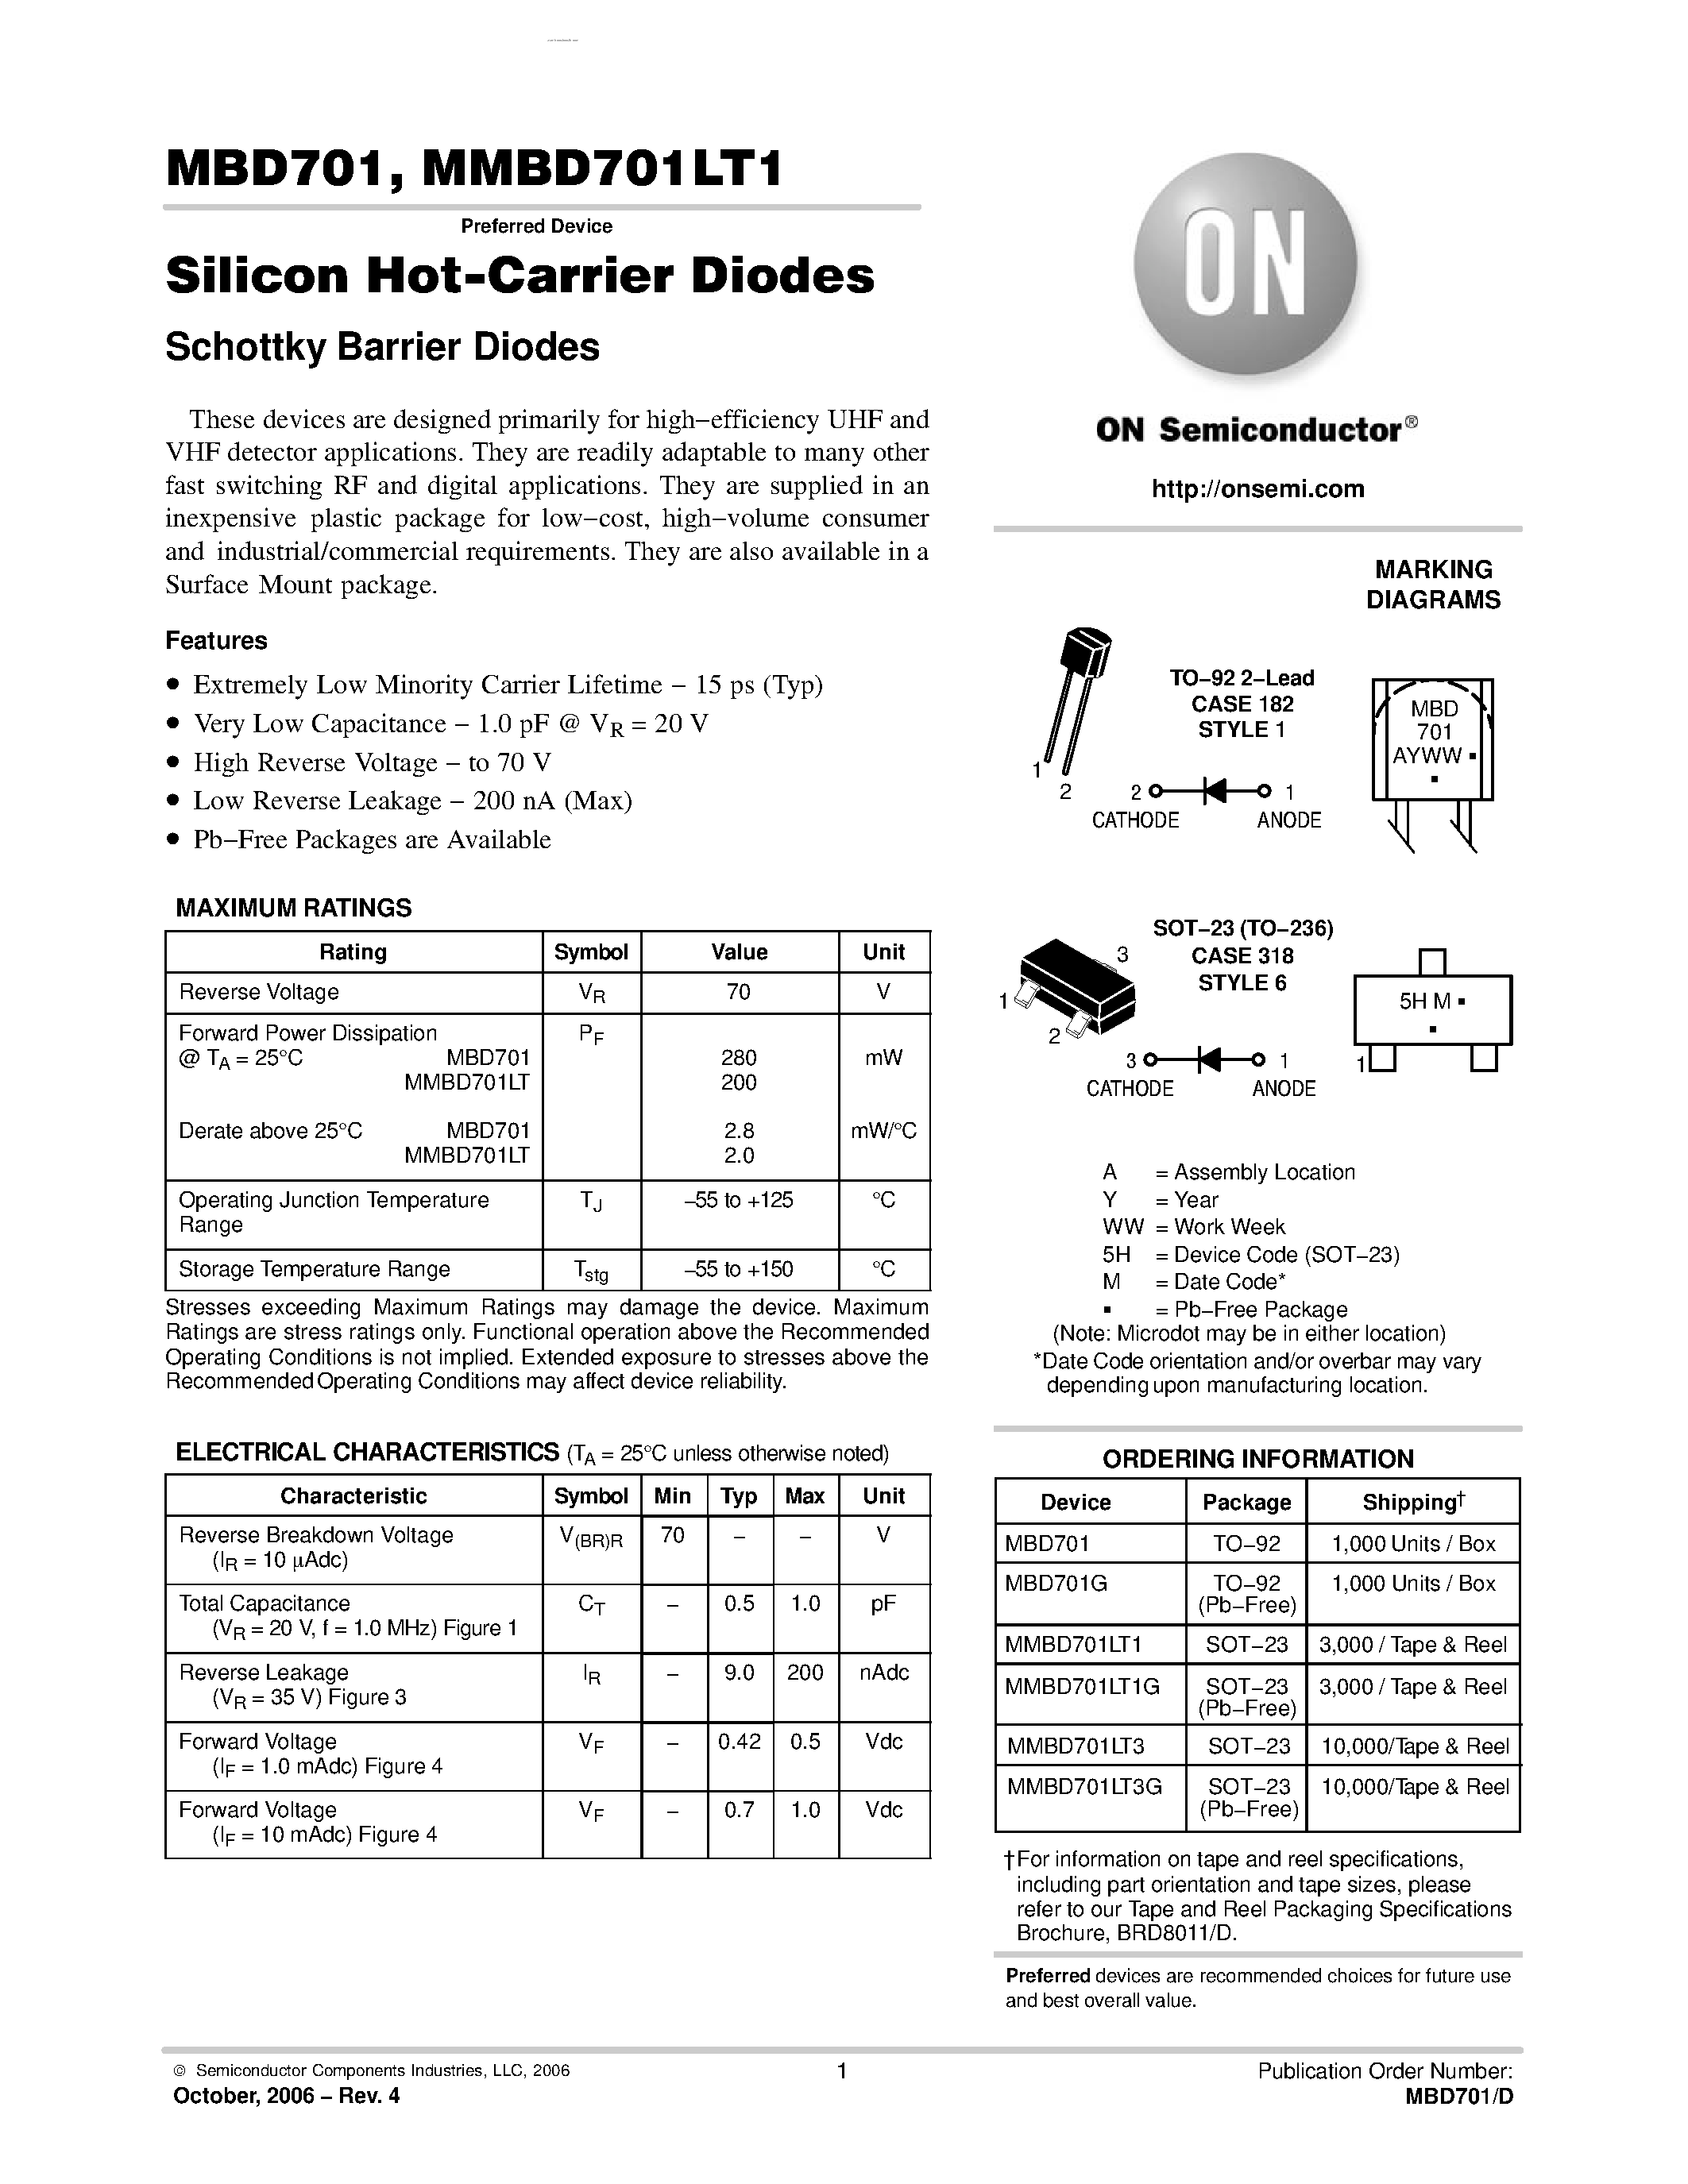 Даташит MMBD701LT1 - SILICON HOT-CARRIER DETECTOR AND SWITCHING DIODES страница 1